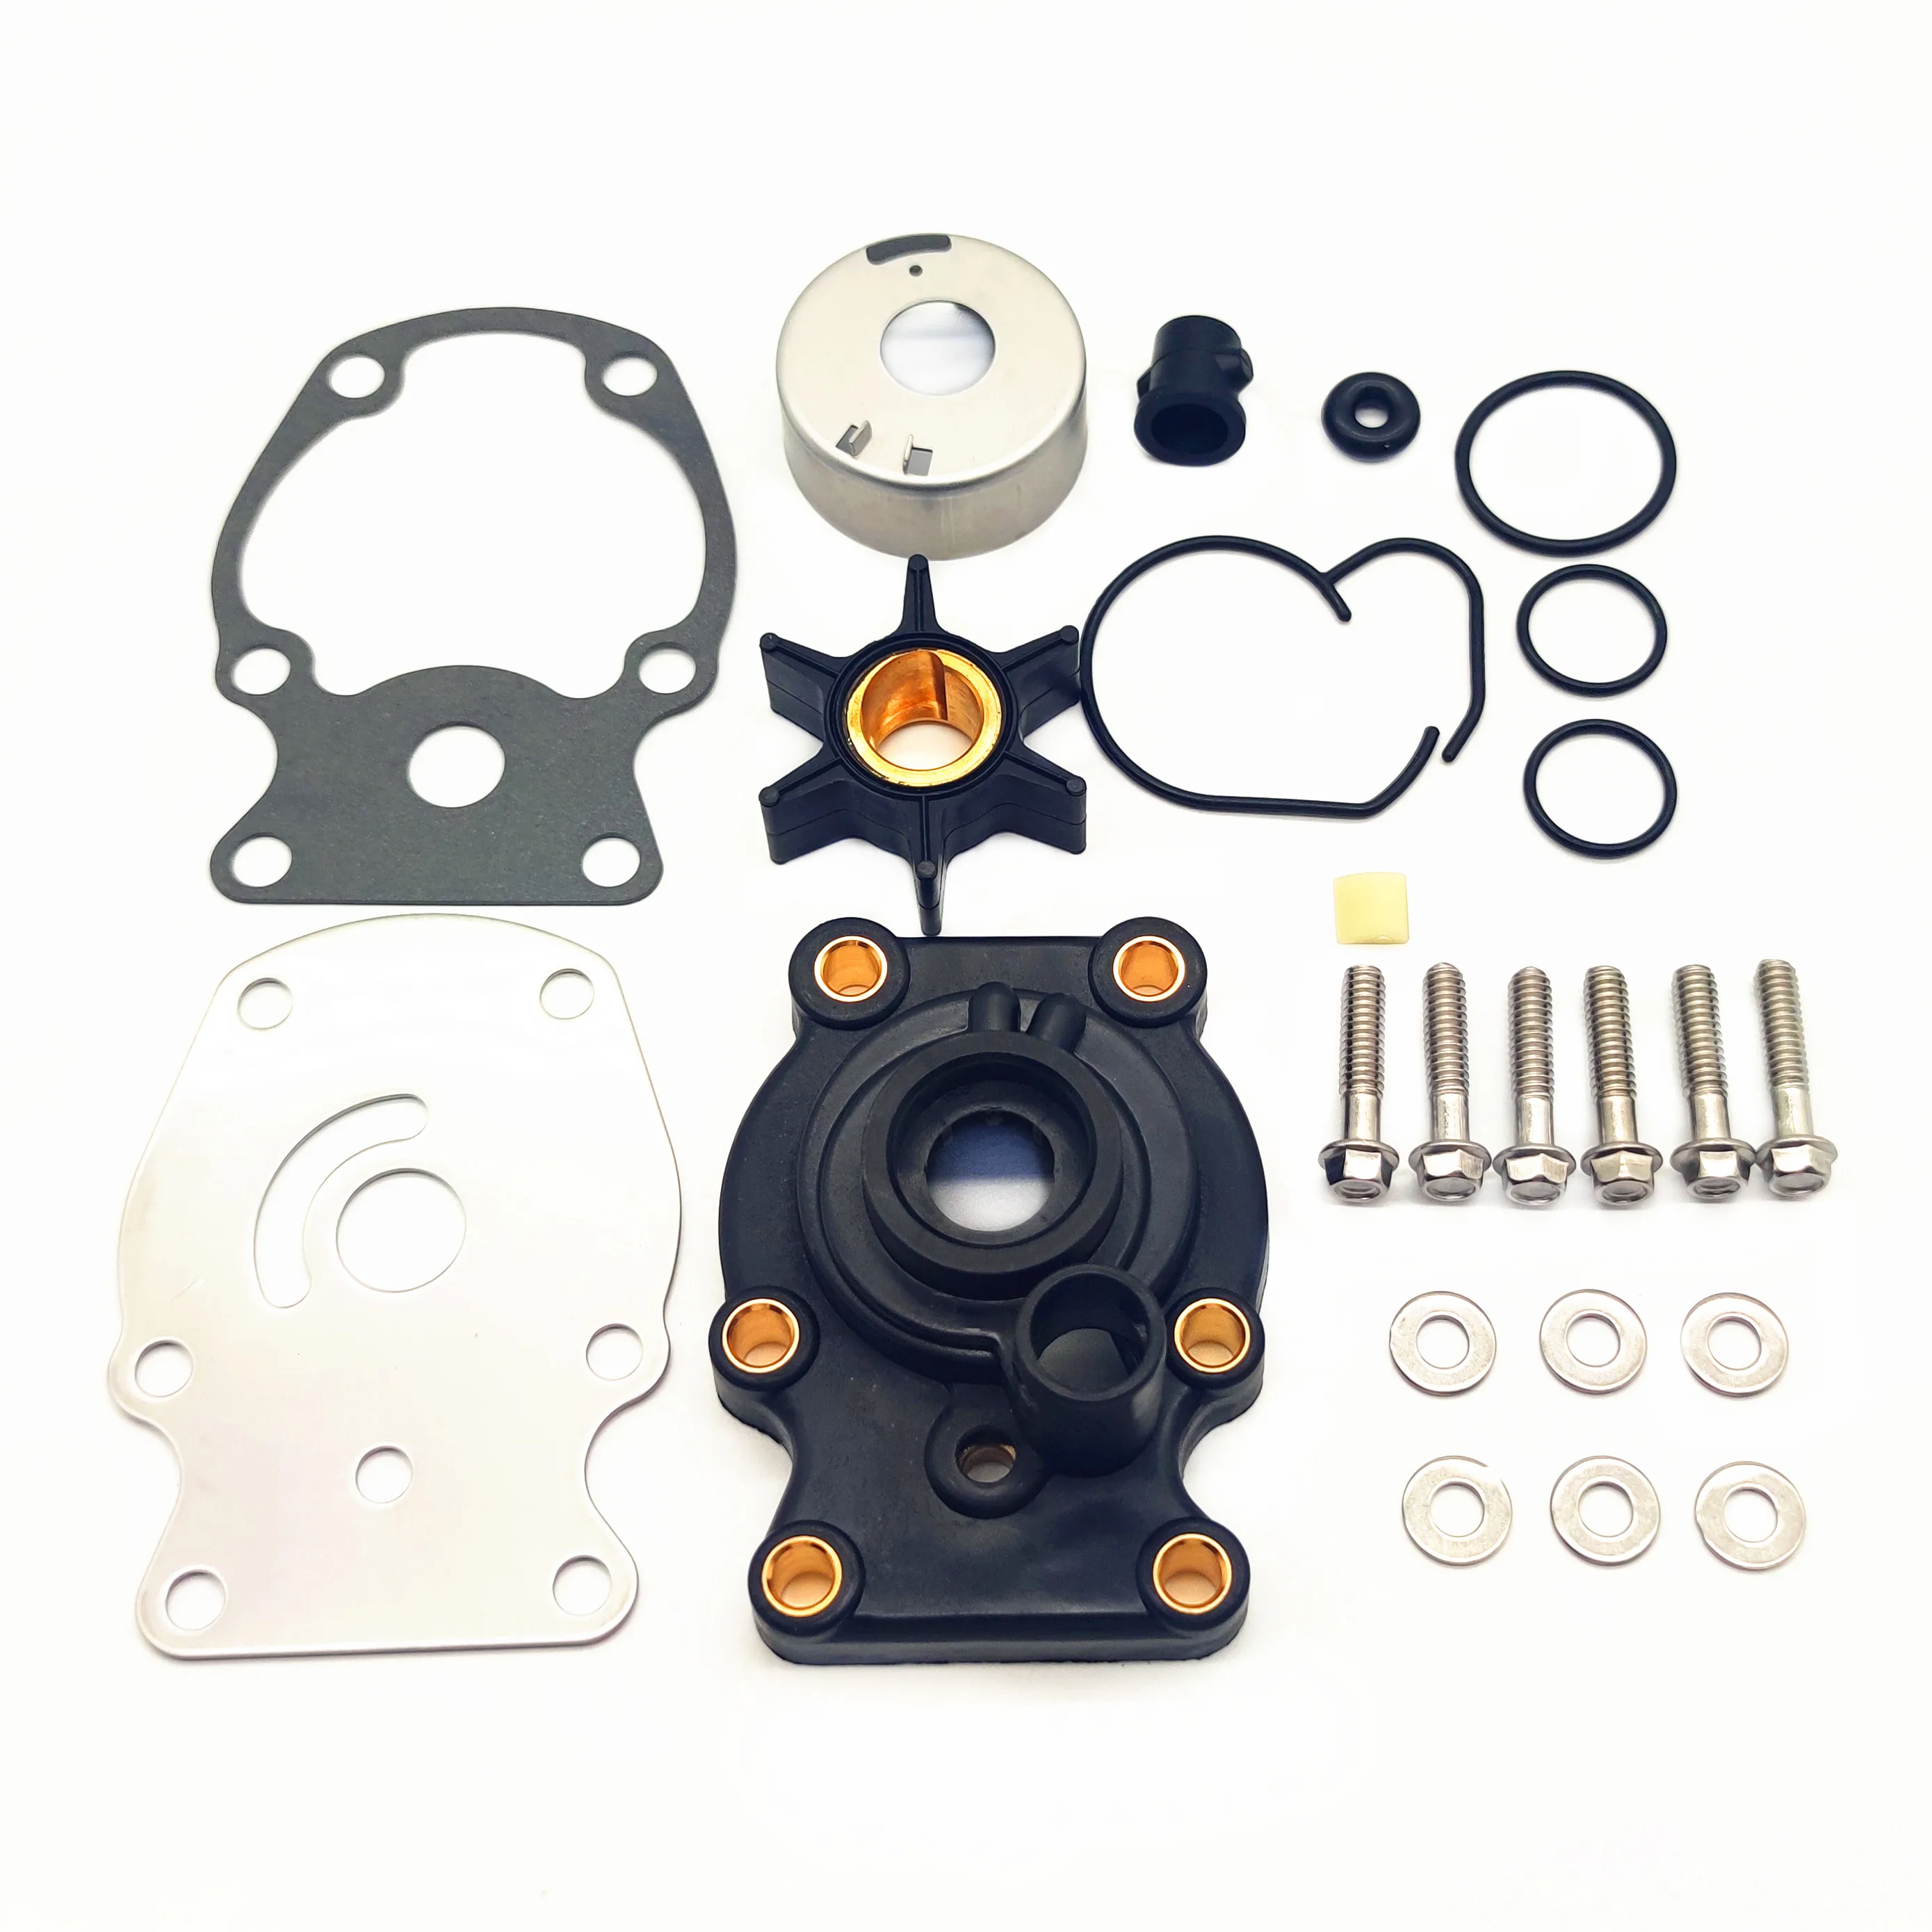 Jetunit Water Pump Repair Kits Impeller for Johnson/Evinrude/Omc Outboard 393630,0393630,395289,393632,328755,18-3382 20/25/30/3